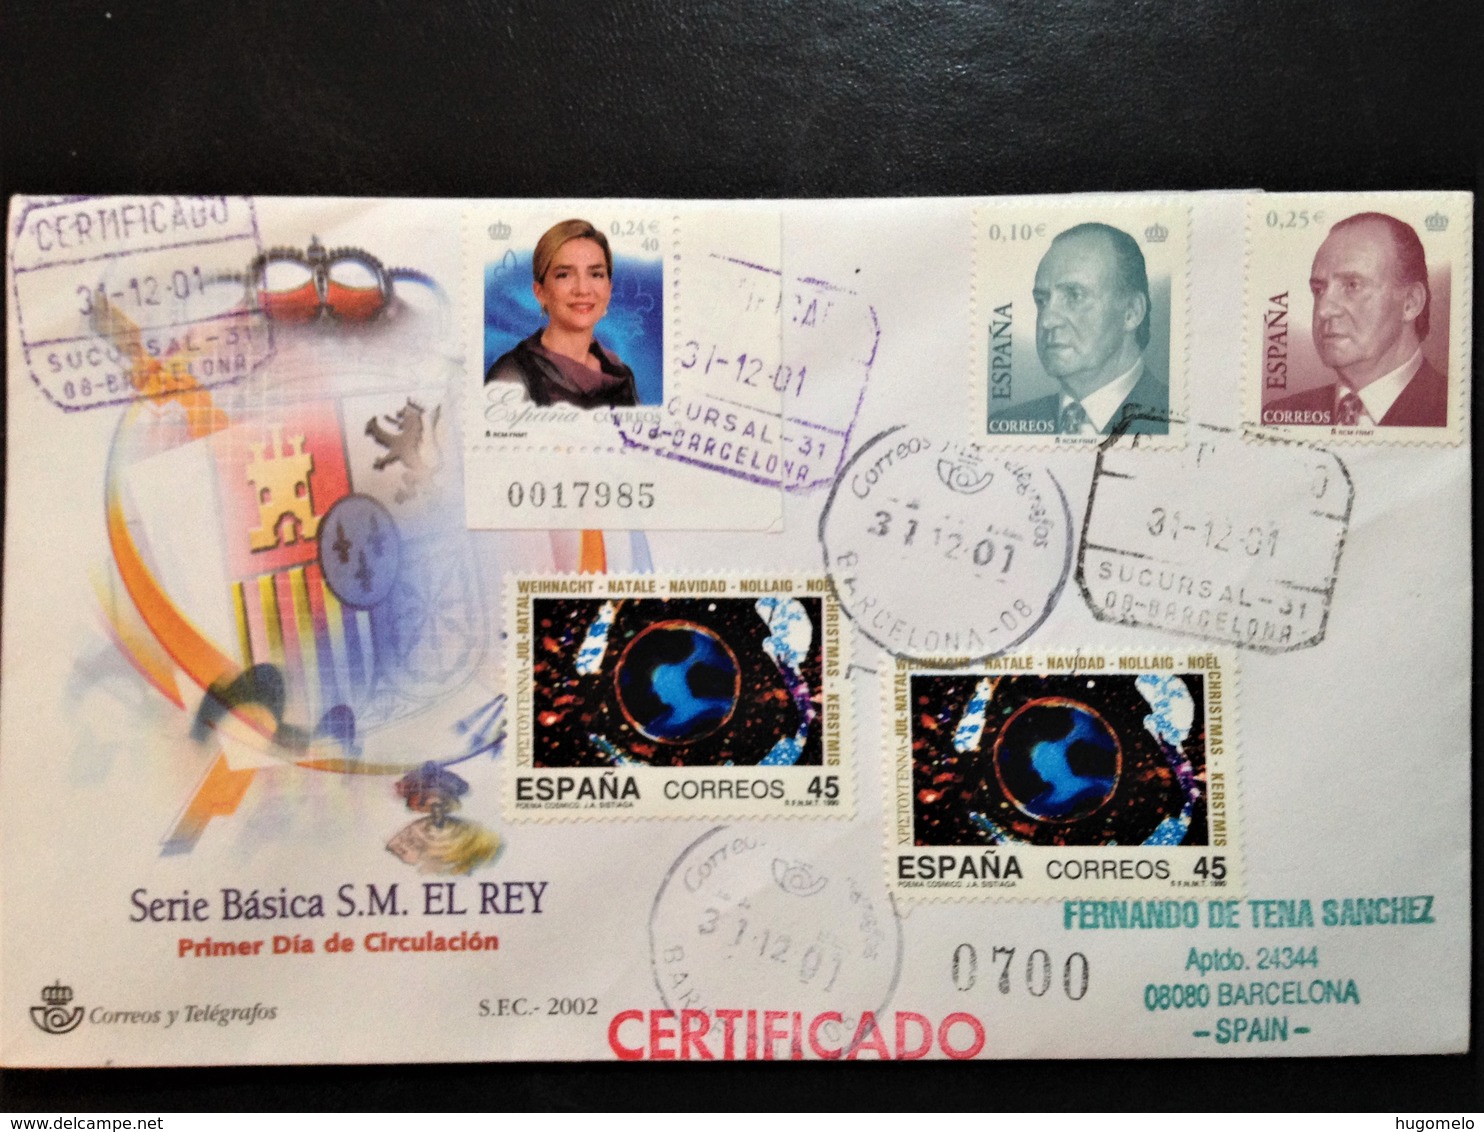 Spain, Registered And Circulated FDC, "Serie Básica S.M. El Rey", 2001 "M - FDC